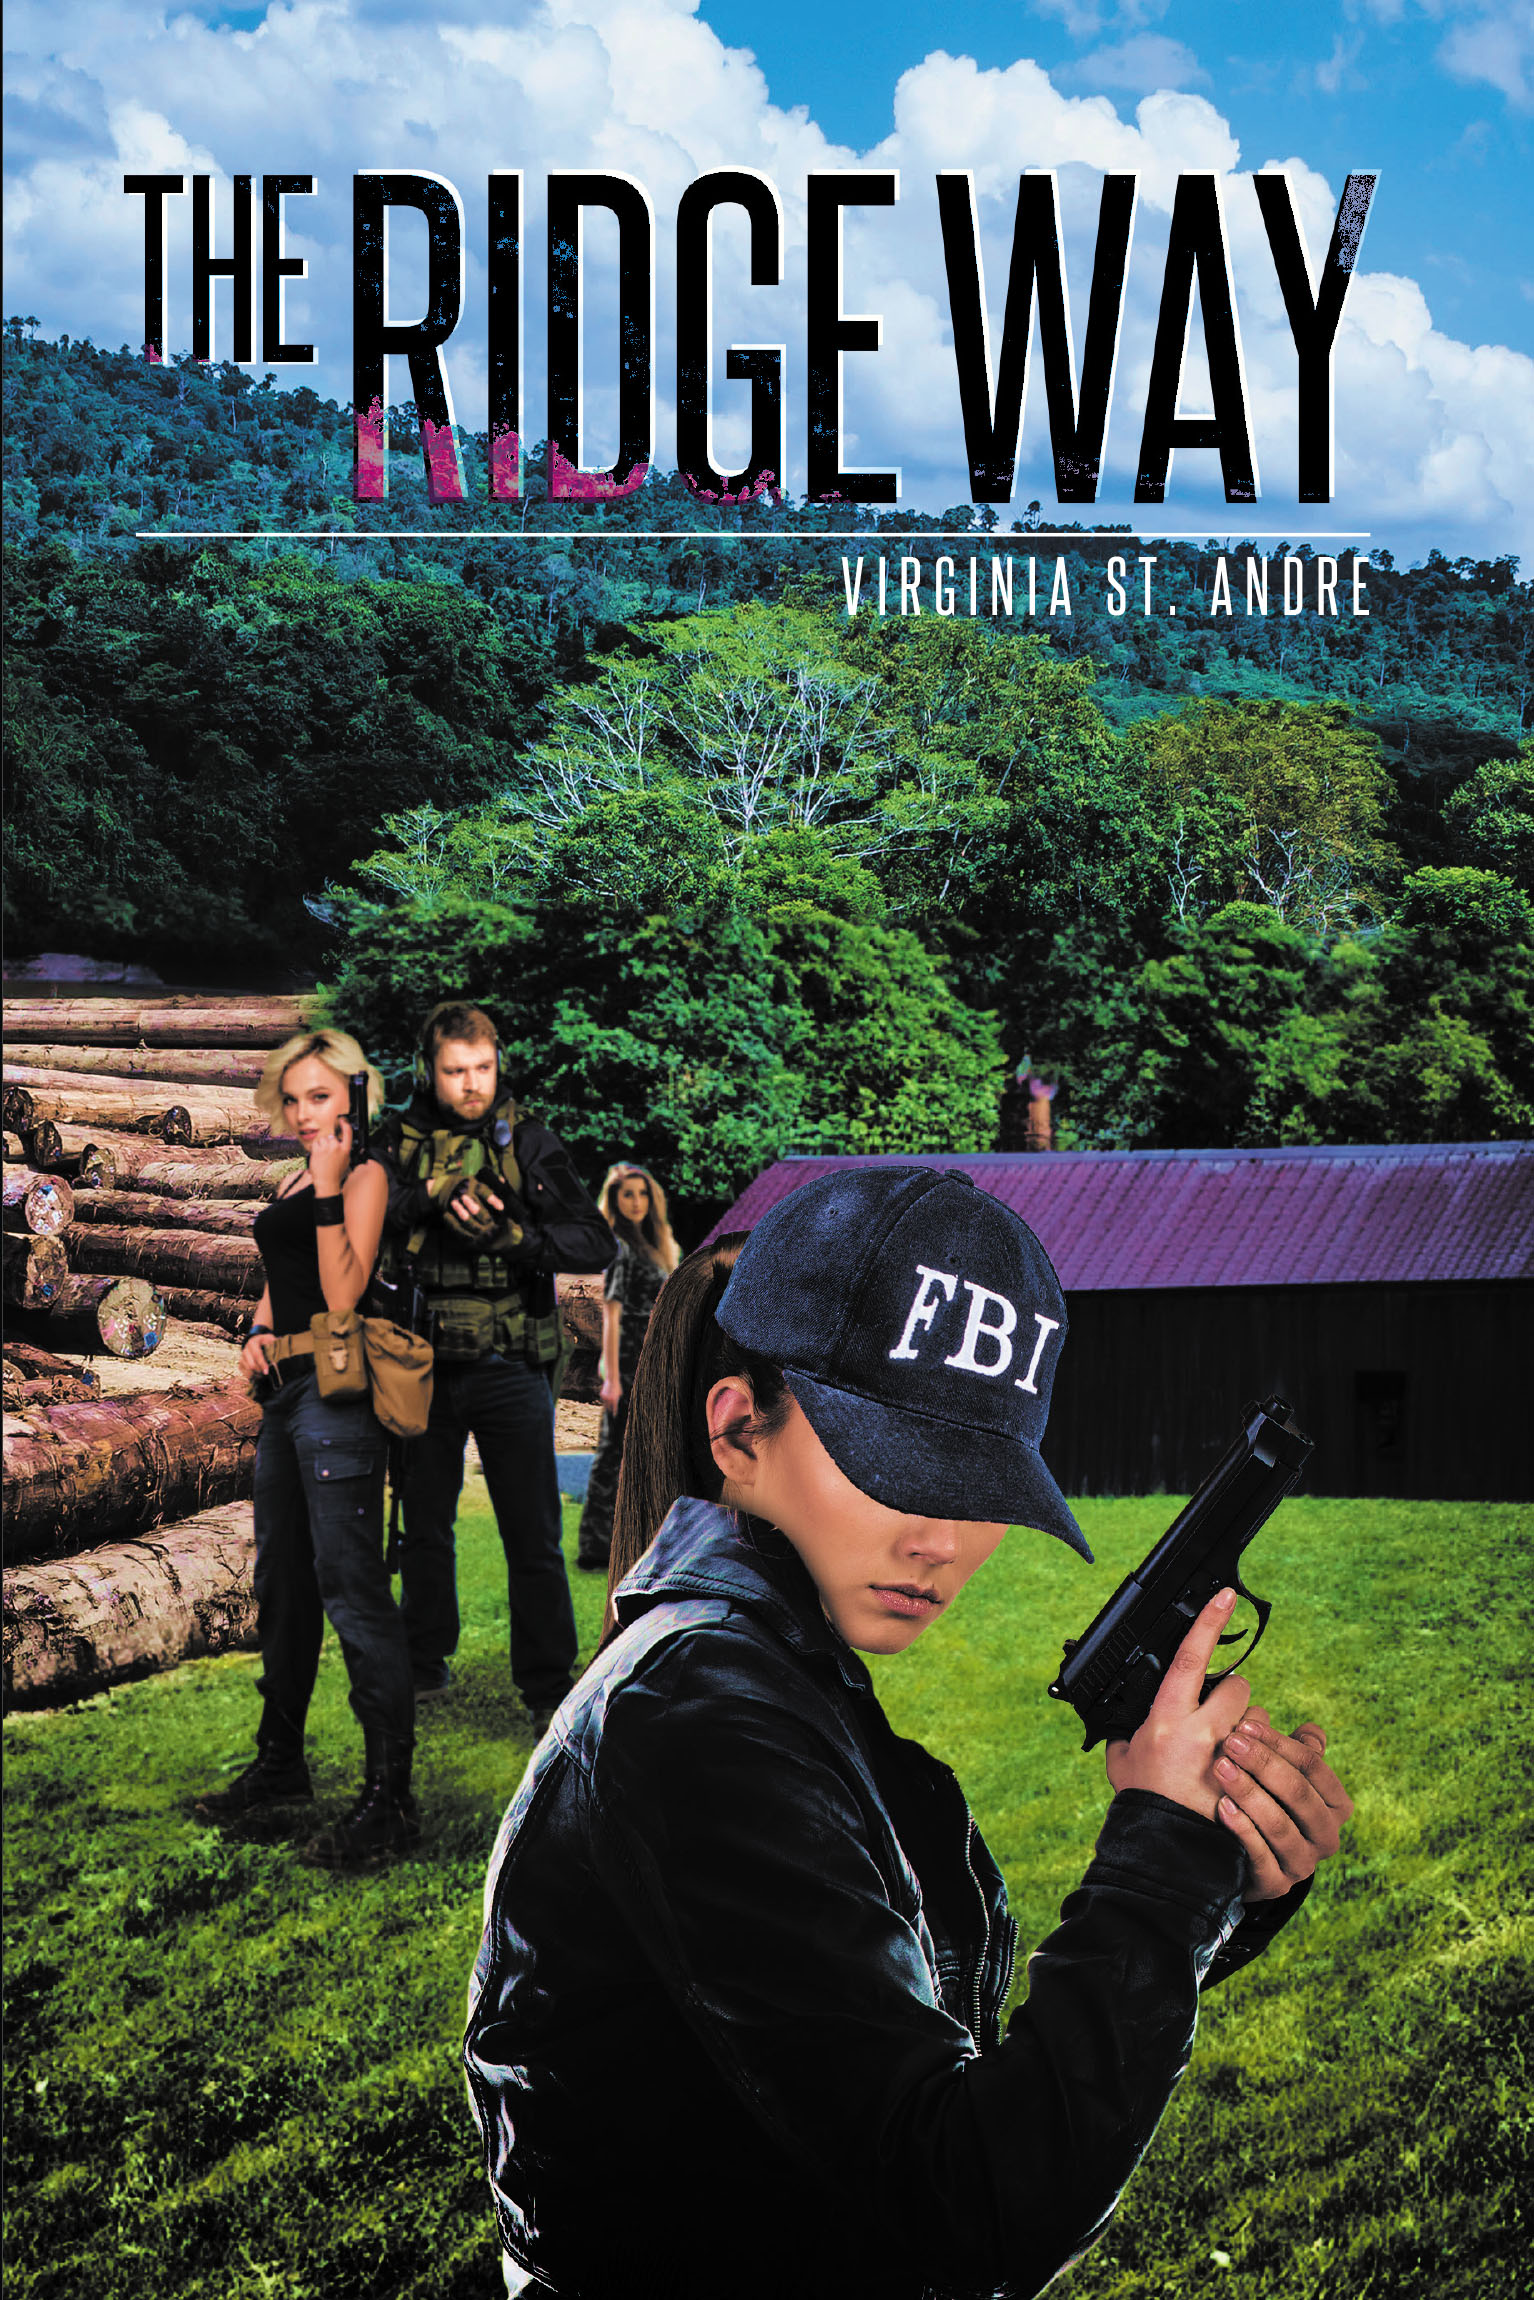 Author Virginia St. Andre’s New Book, "The Ridge Way," Follows an FBI Special Agent Who Must Overcome Her Past While Attempting to Solve a Series of Murders in Iowa